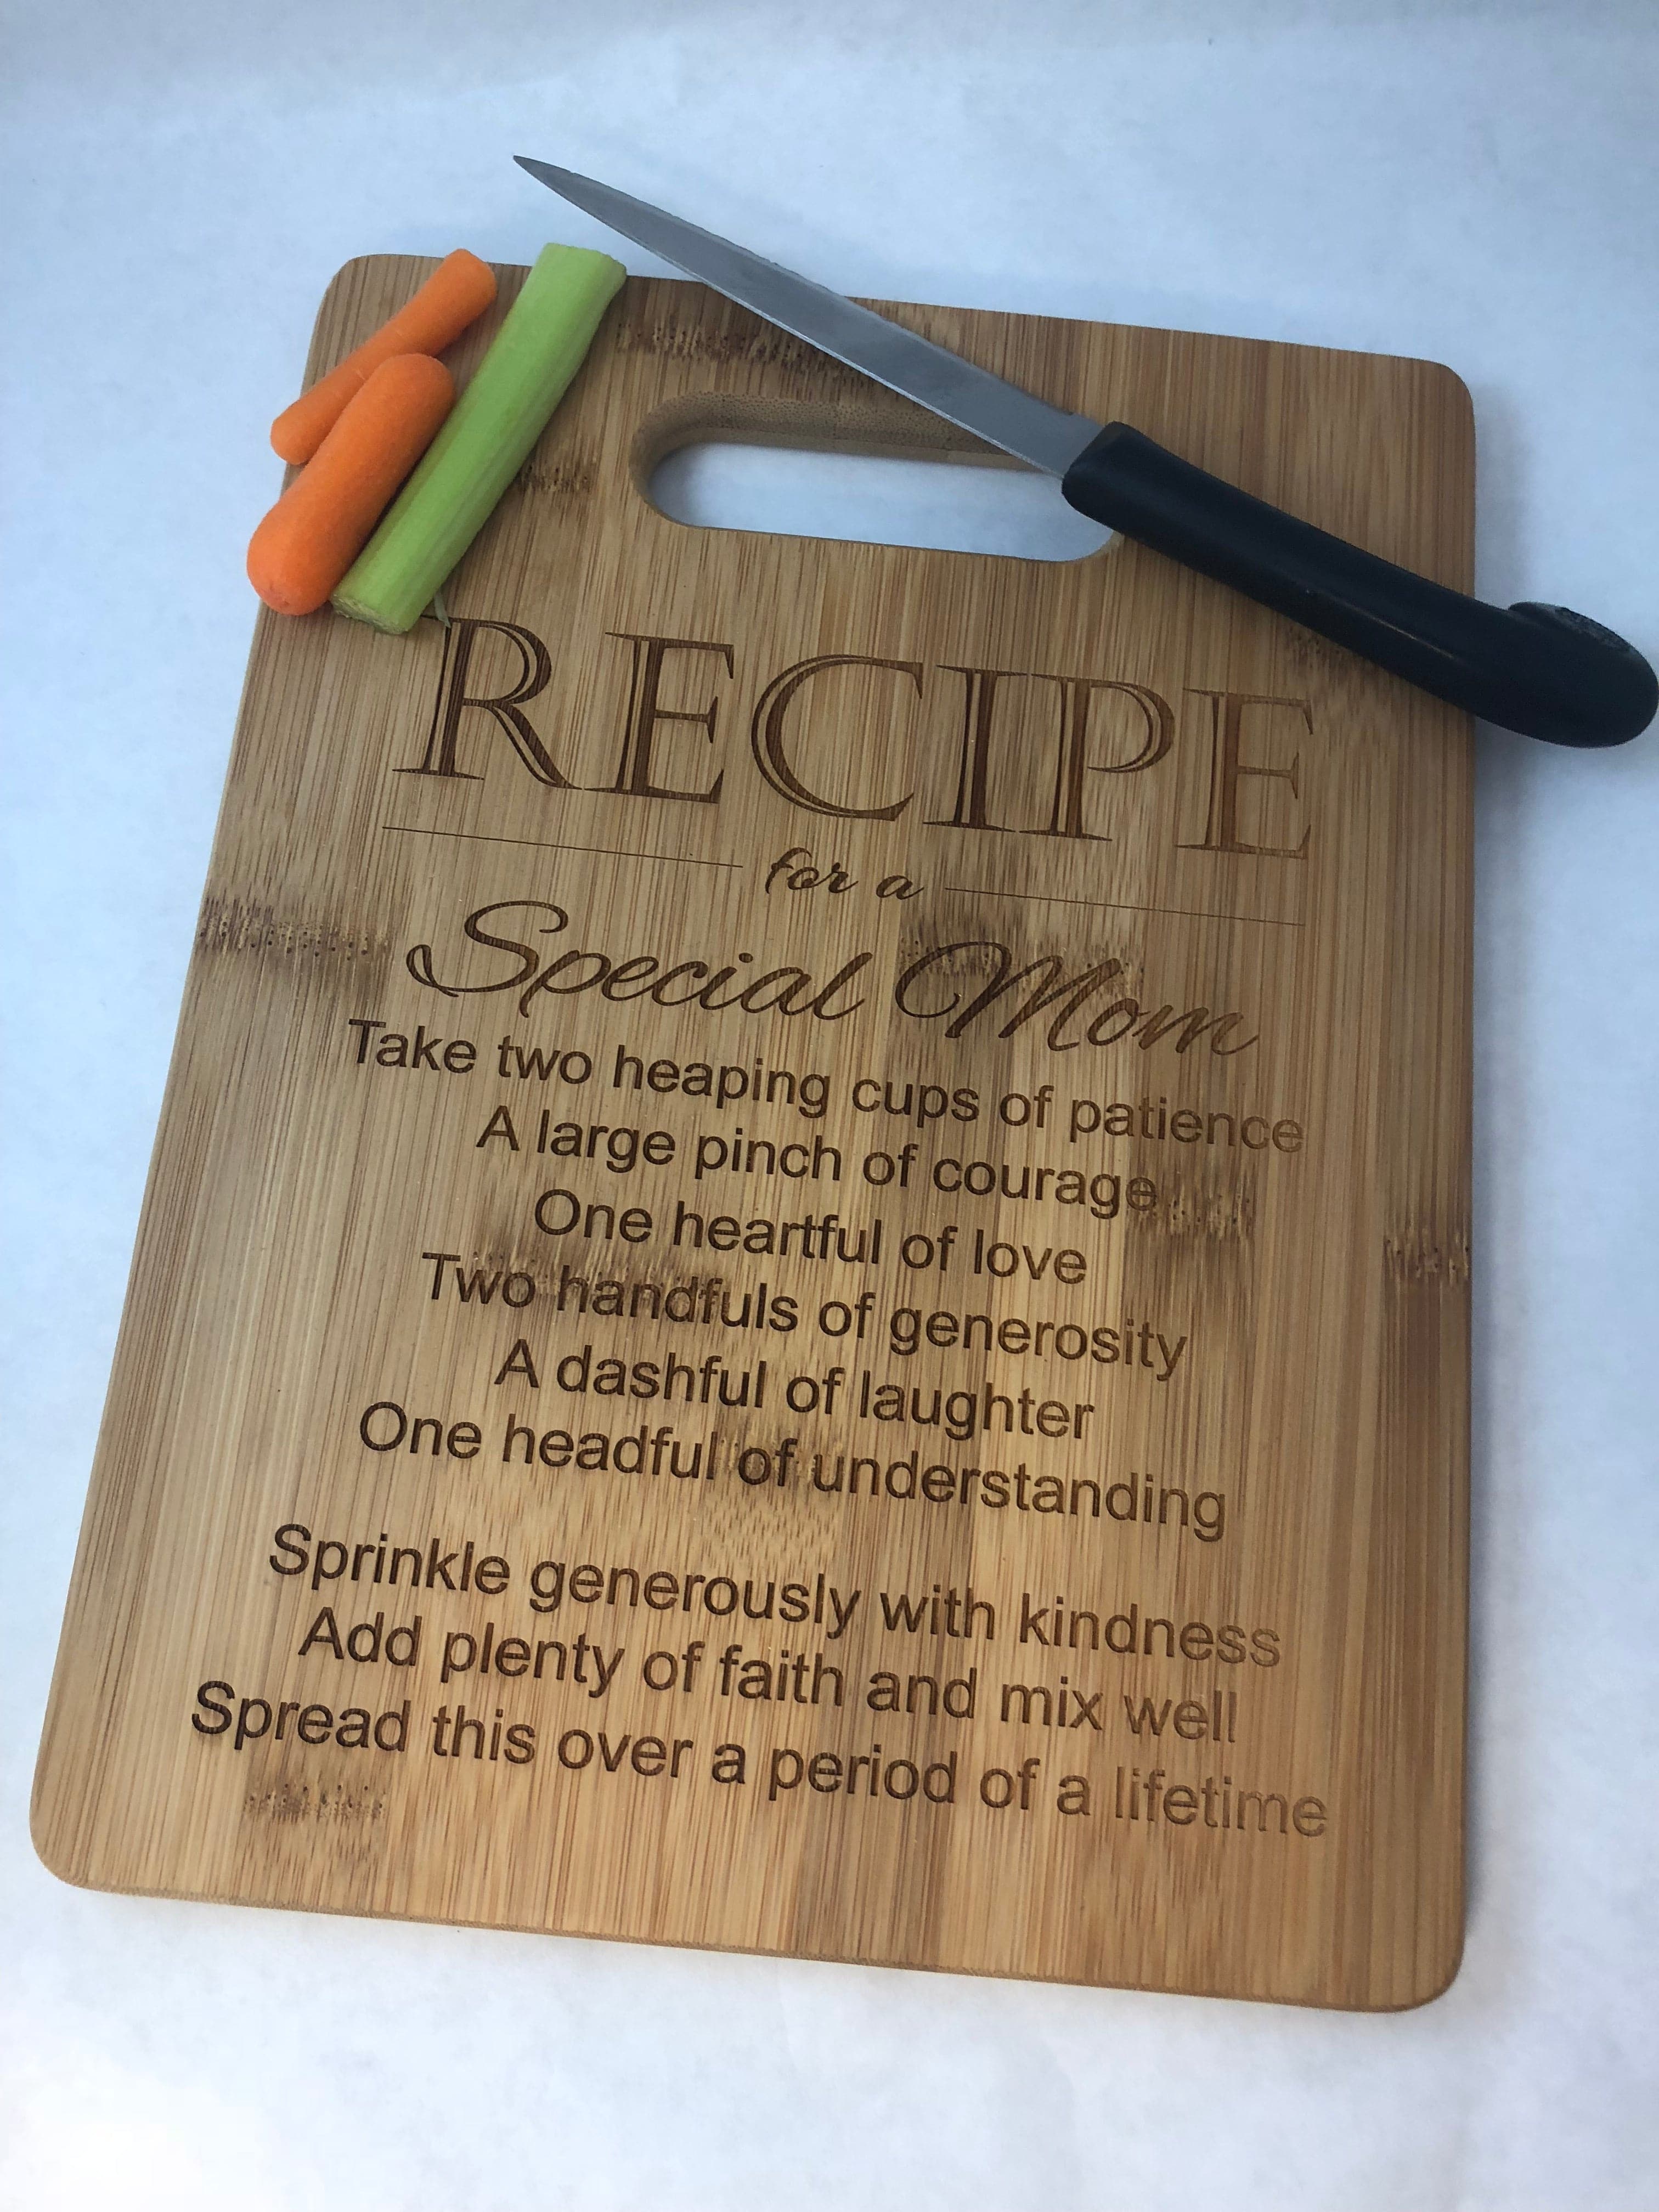 KITCHENVOY Mom Cutting Board Special Love Heart Poem Laser Engraved Bamboo  Board as Gift for Mom on Mother's Day, Holiday - Birthday Presents for